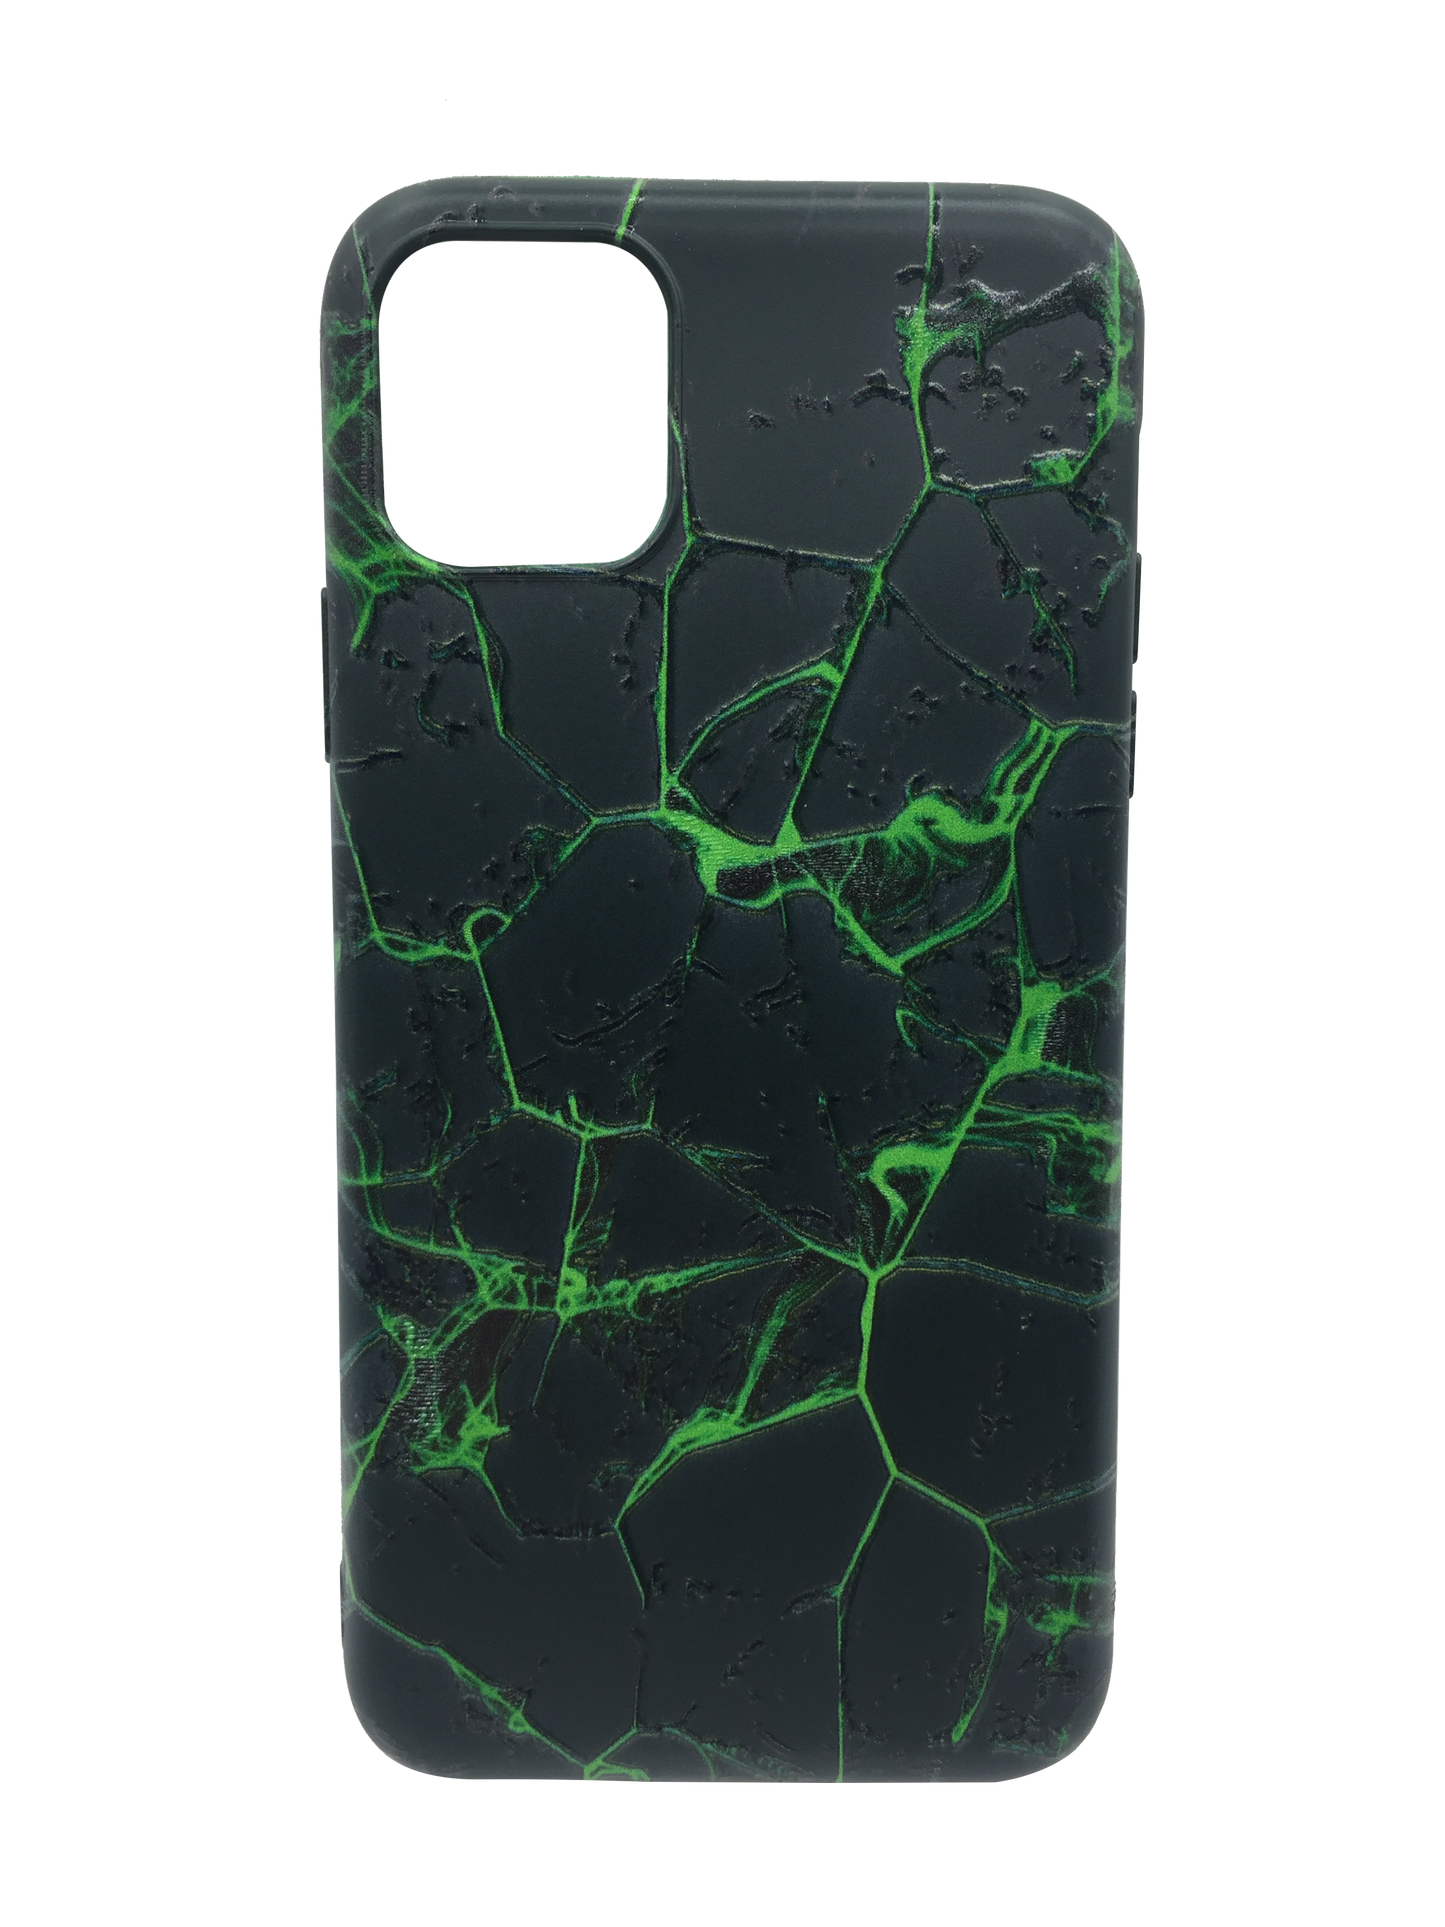 Silicone case iPHONE 11 PRO MAX GREEN